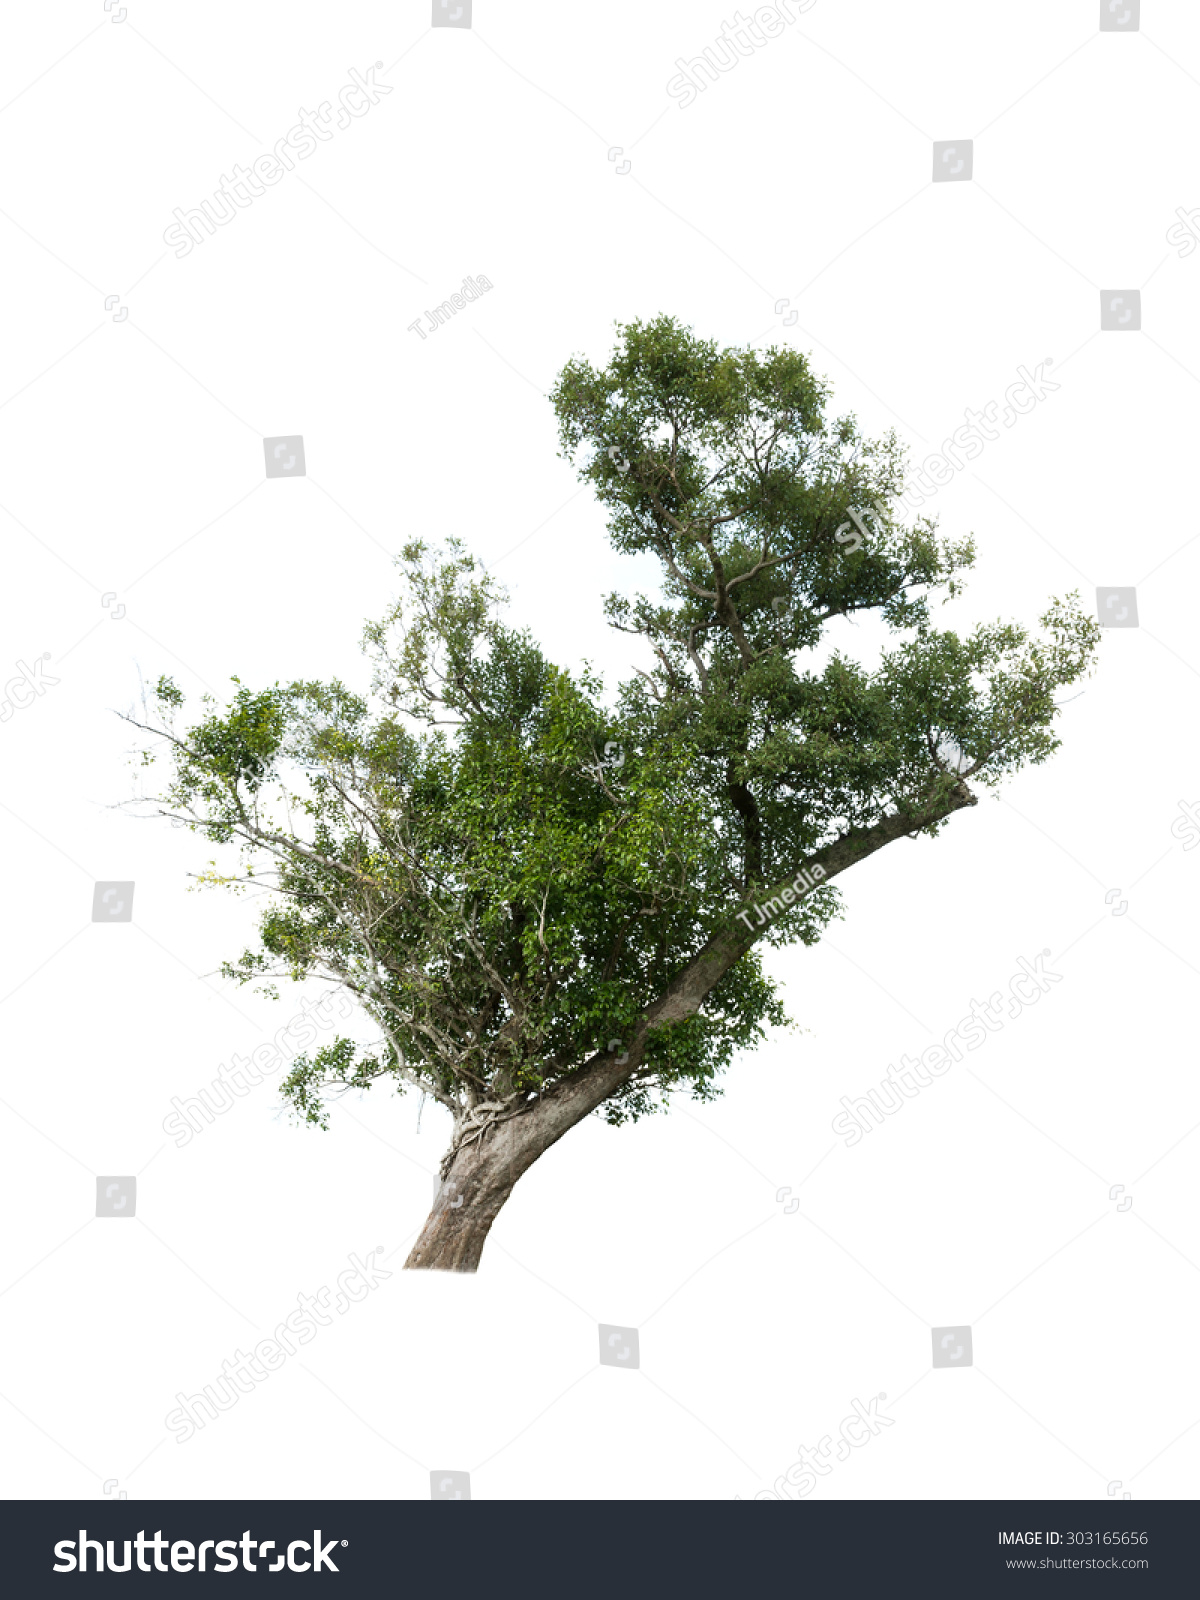 Tree Isolated On White Background Stock Photo 303165656 - Shutterstock